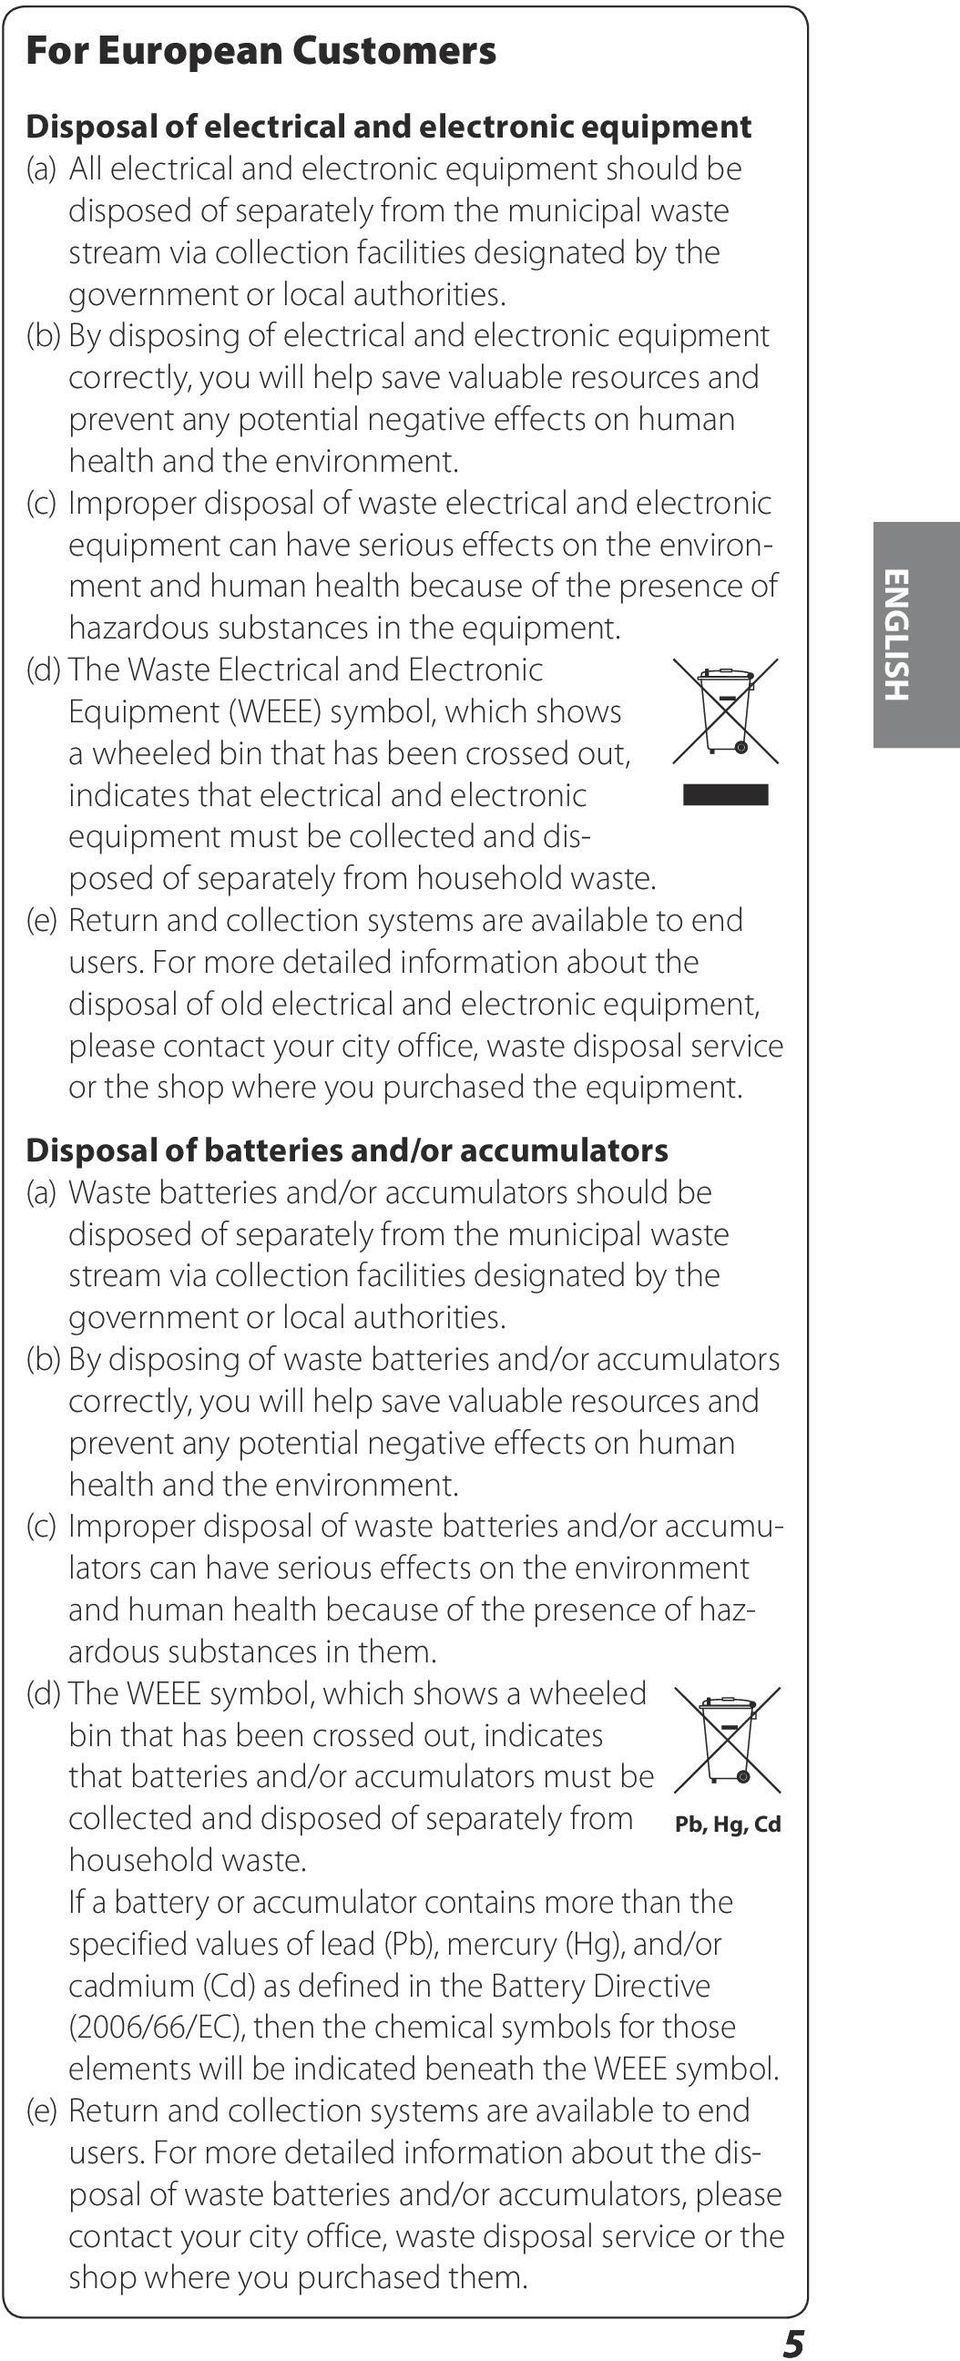 (b) By disposing of electrical and electronic equipment correctly, you will help save valuable resources and prevent any potential negative effects on human health and the environment.